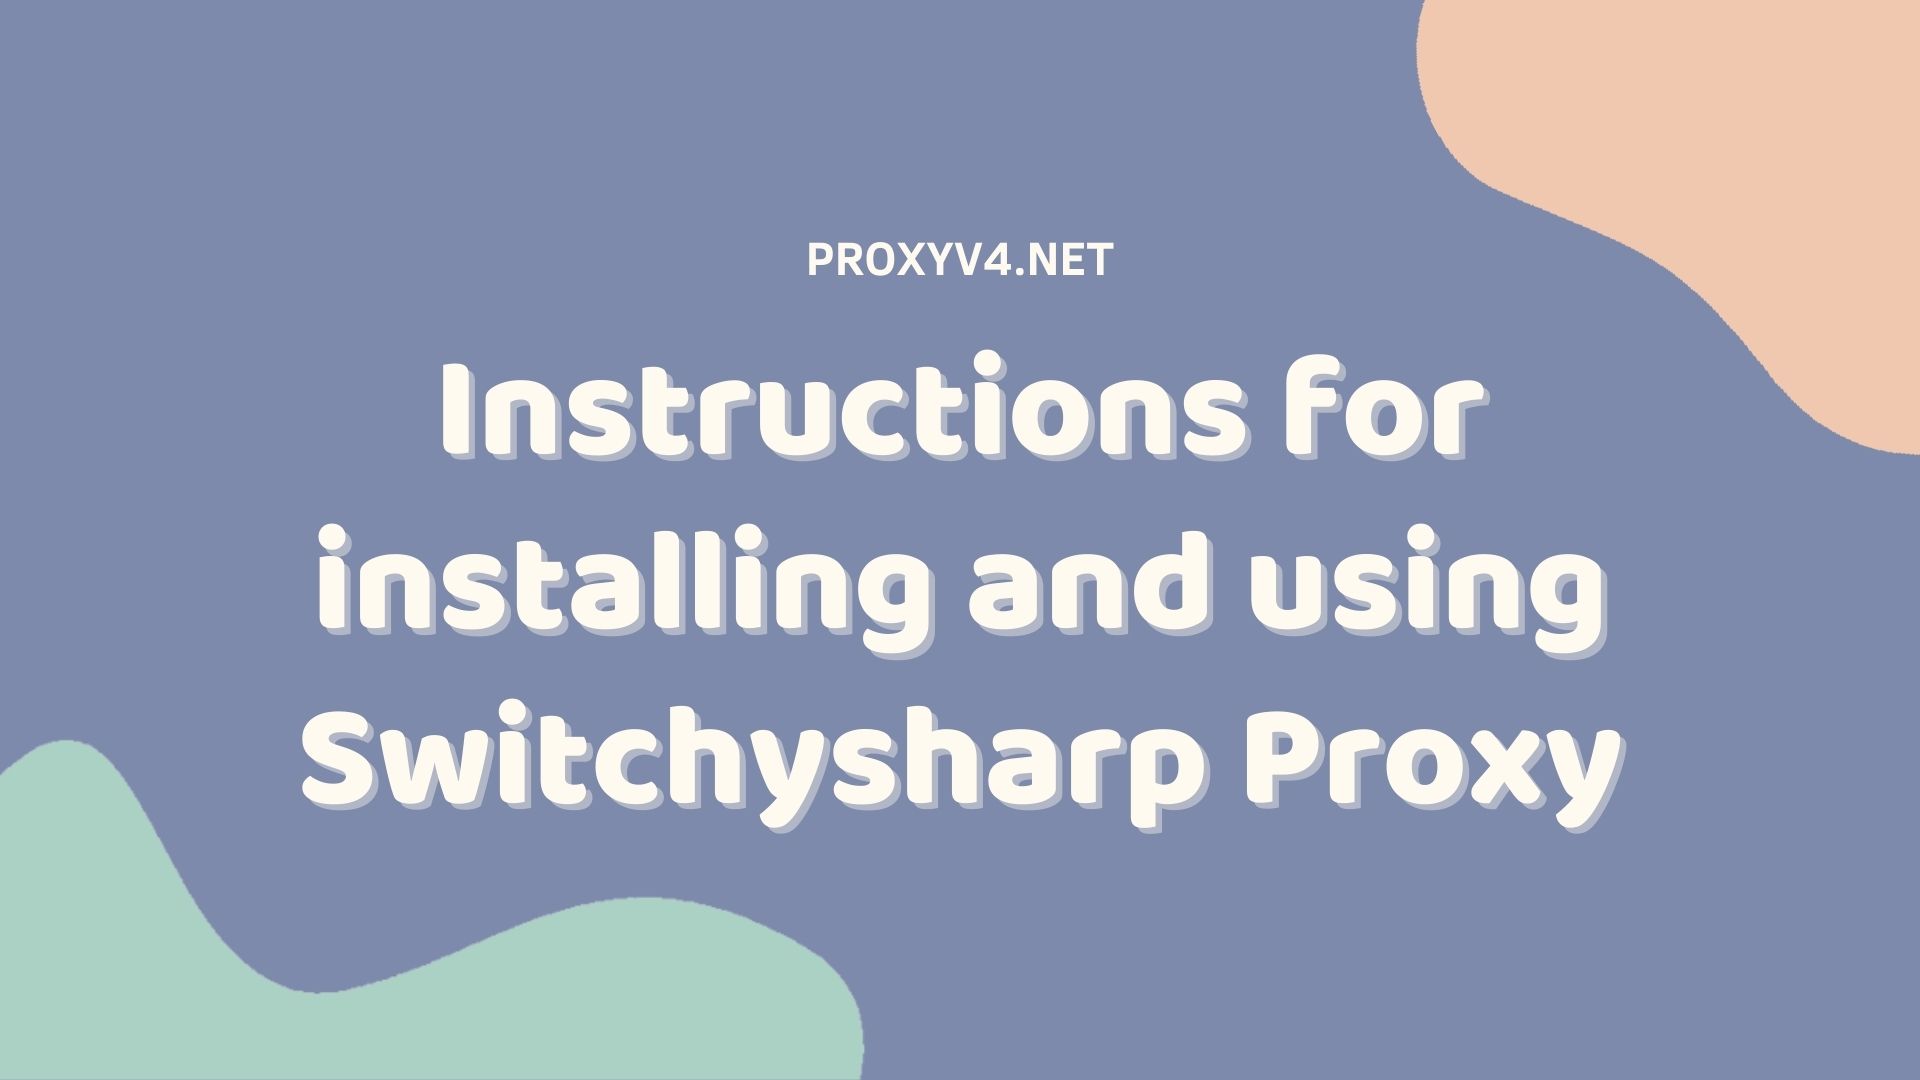 Instructions for installing and using proxy switchysharp